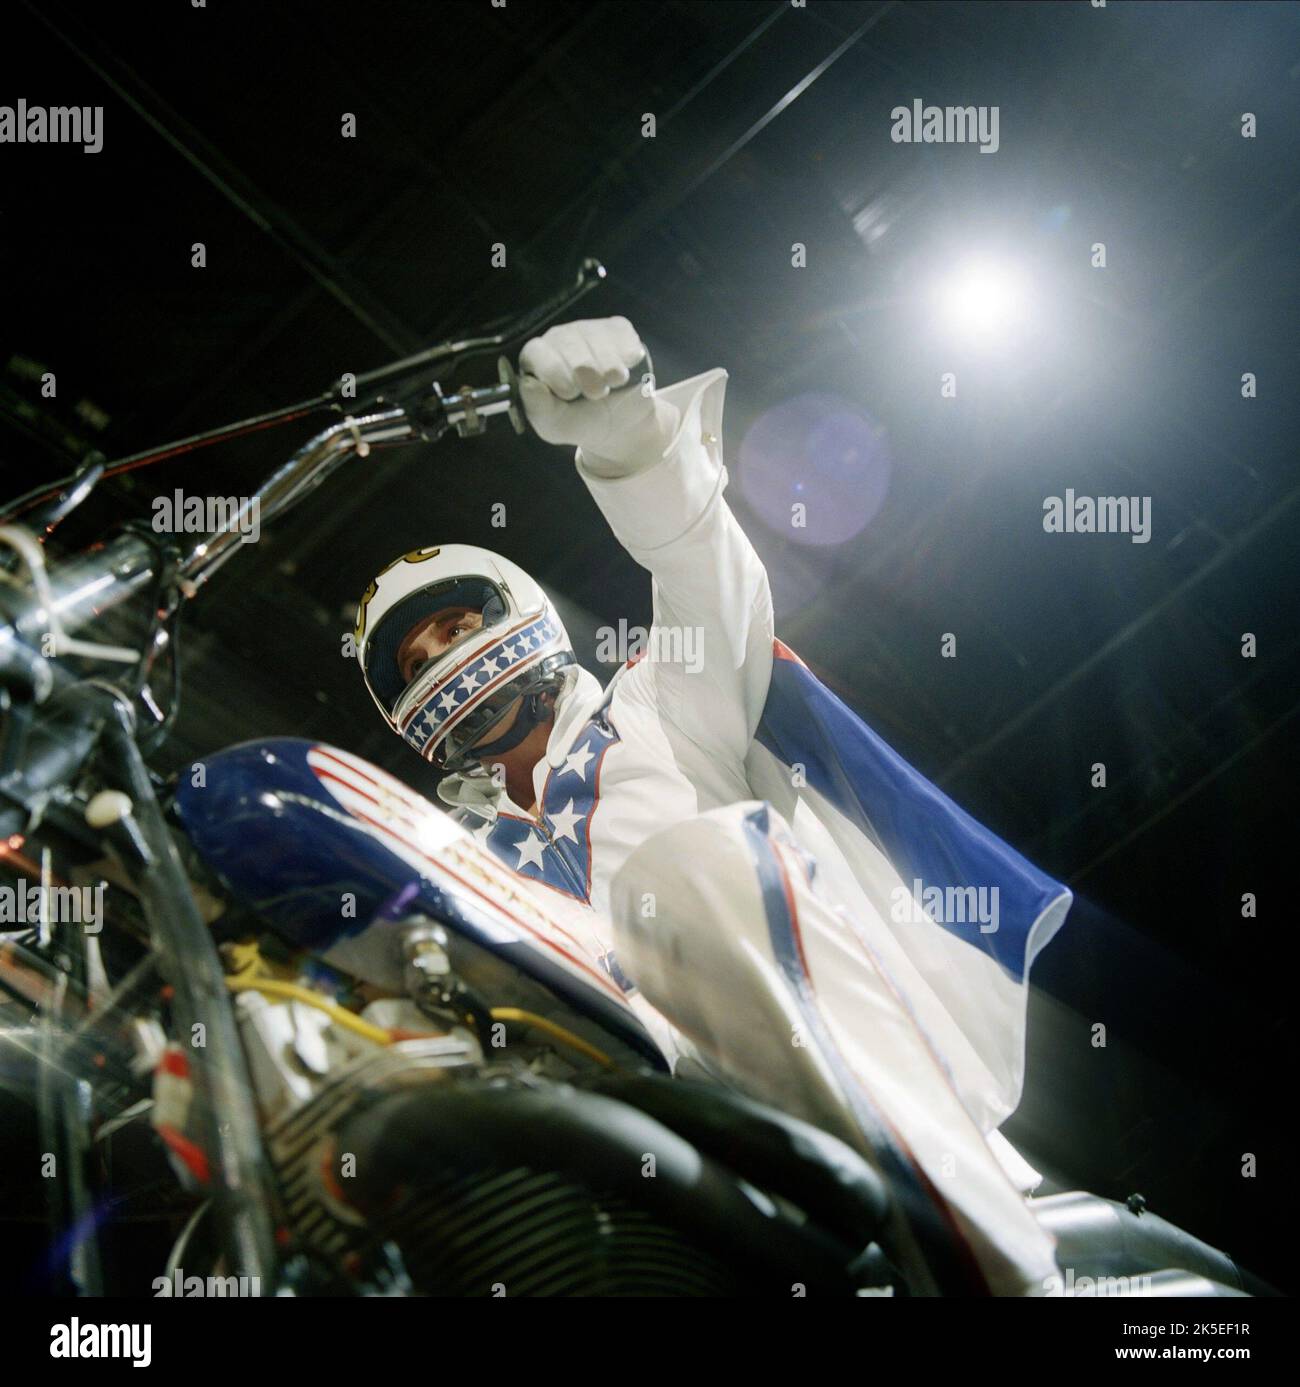 GEORGE EADS, EVEL KNIEVEL, 2004 Foto Stock